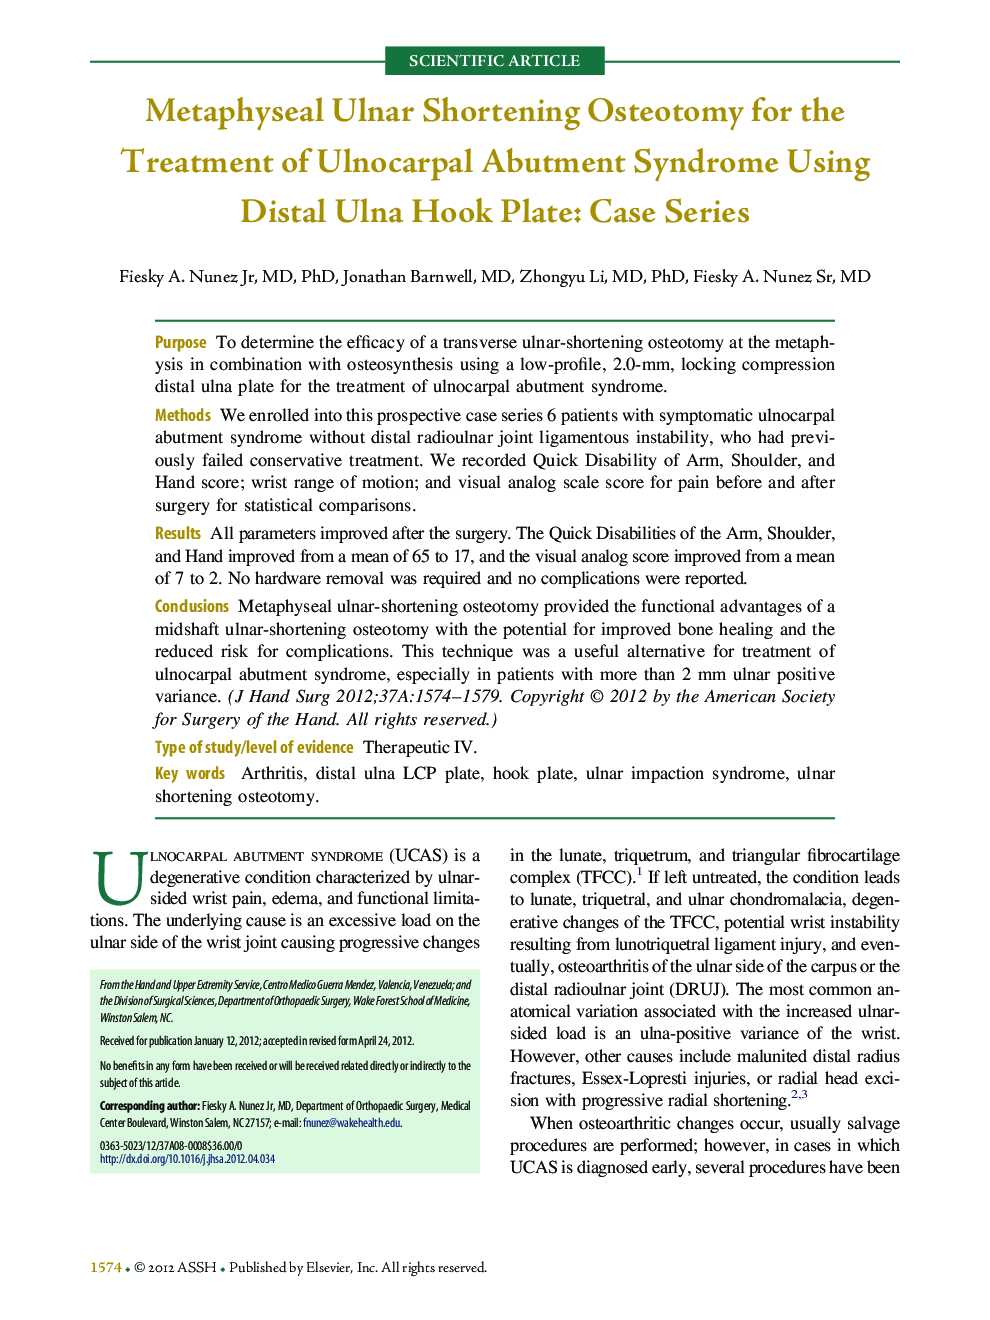 Metaphyseal Ulnar Shortening Osteotomy for the Treatment of Ulnocarpal Abutment Syndrome Using Distal Ulna Hook Plate: Case Series